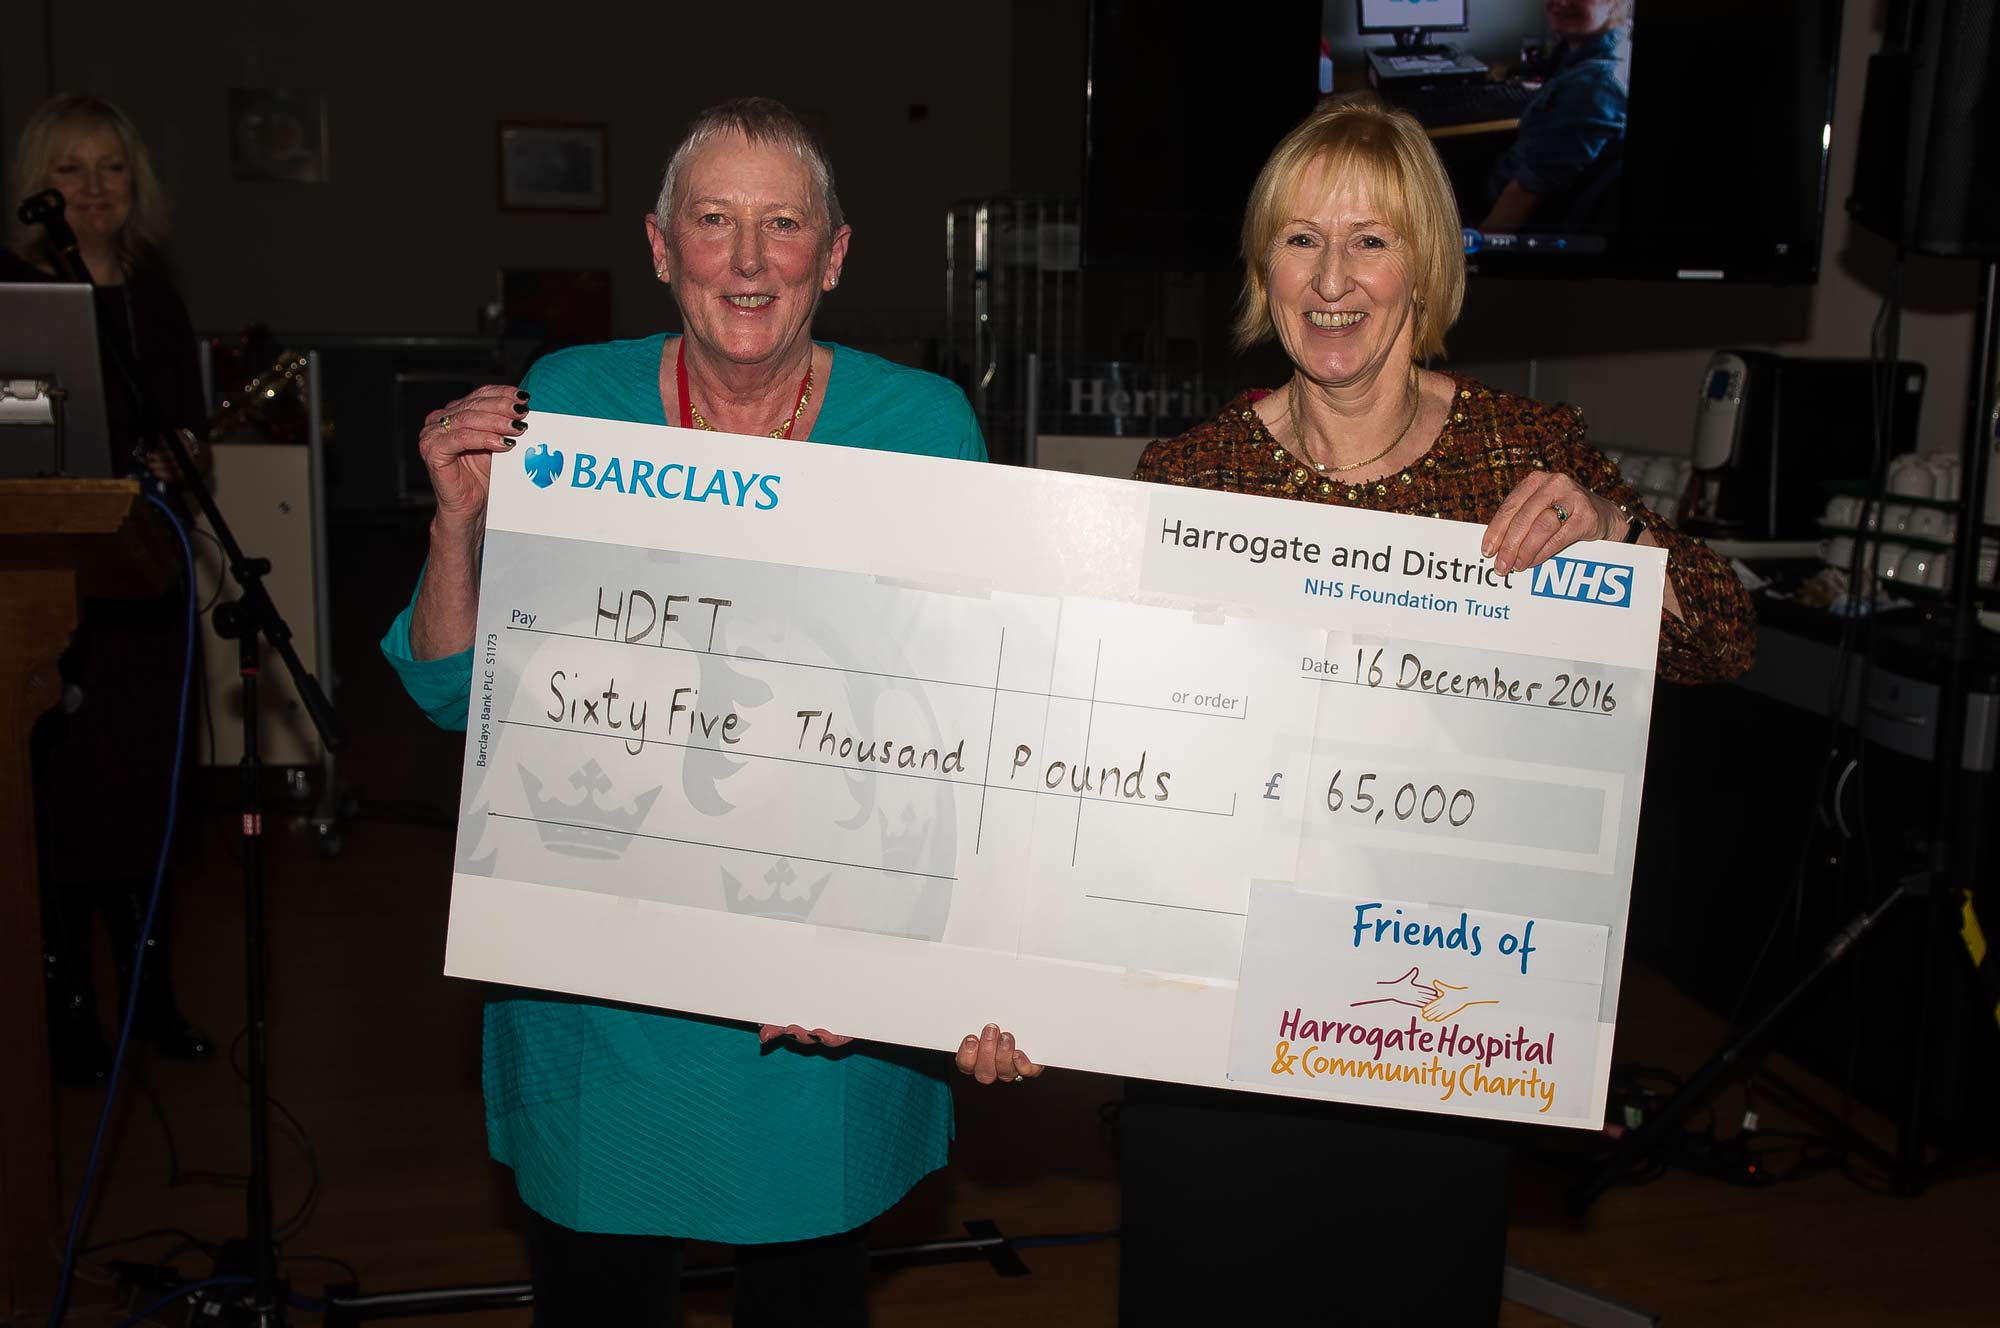 Harrogate District Foundation Trust was given a cheque by the Harrogate Hospital & Community Charity